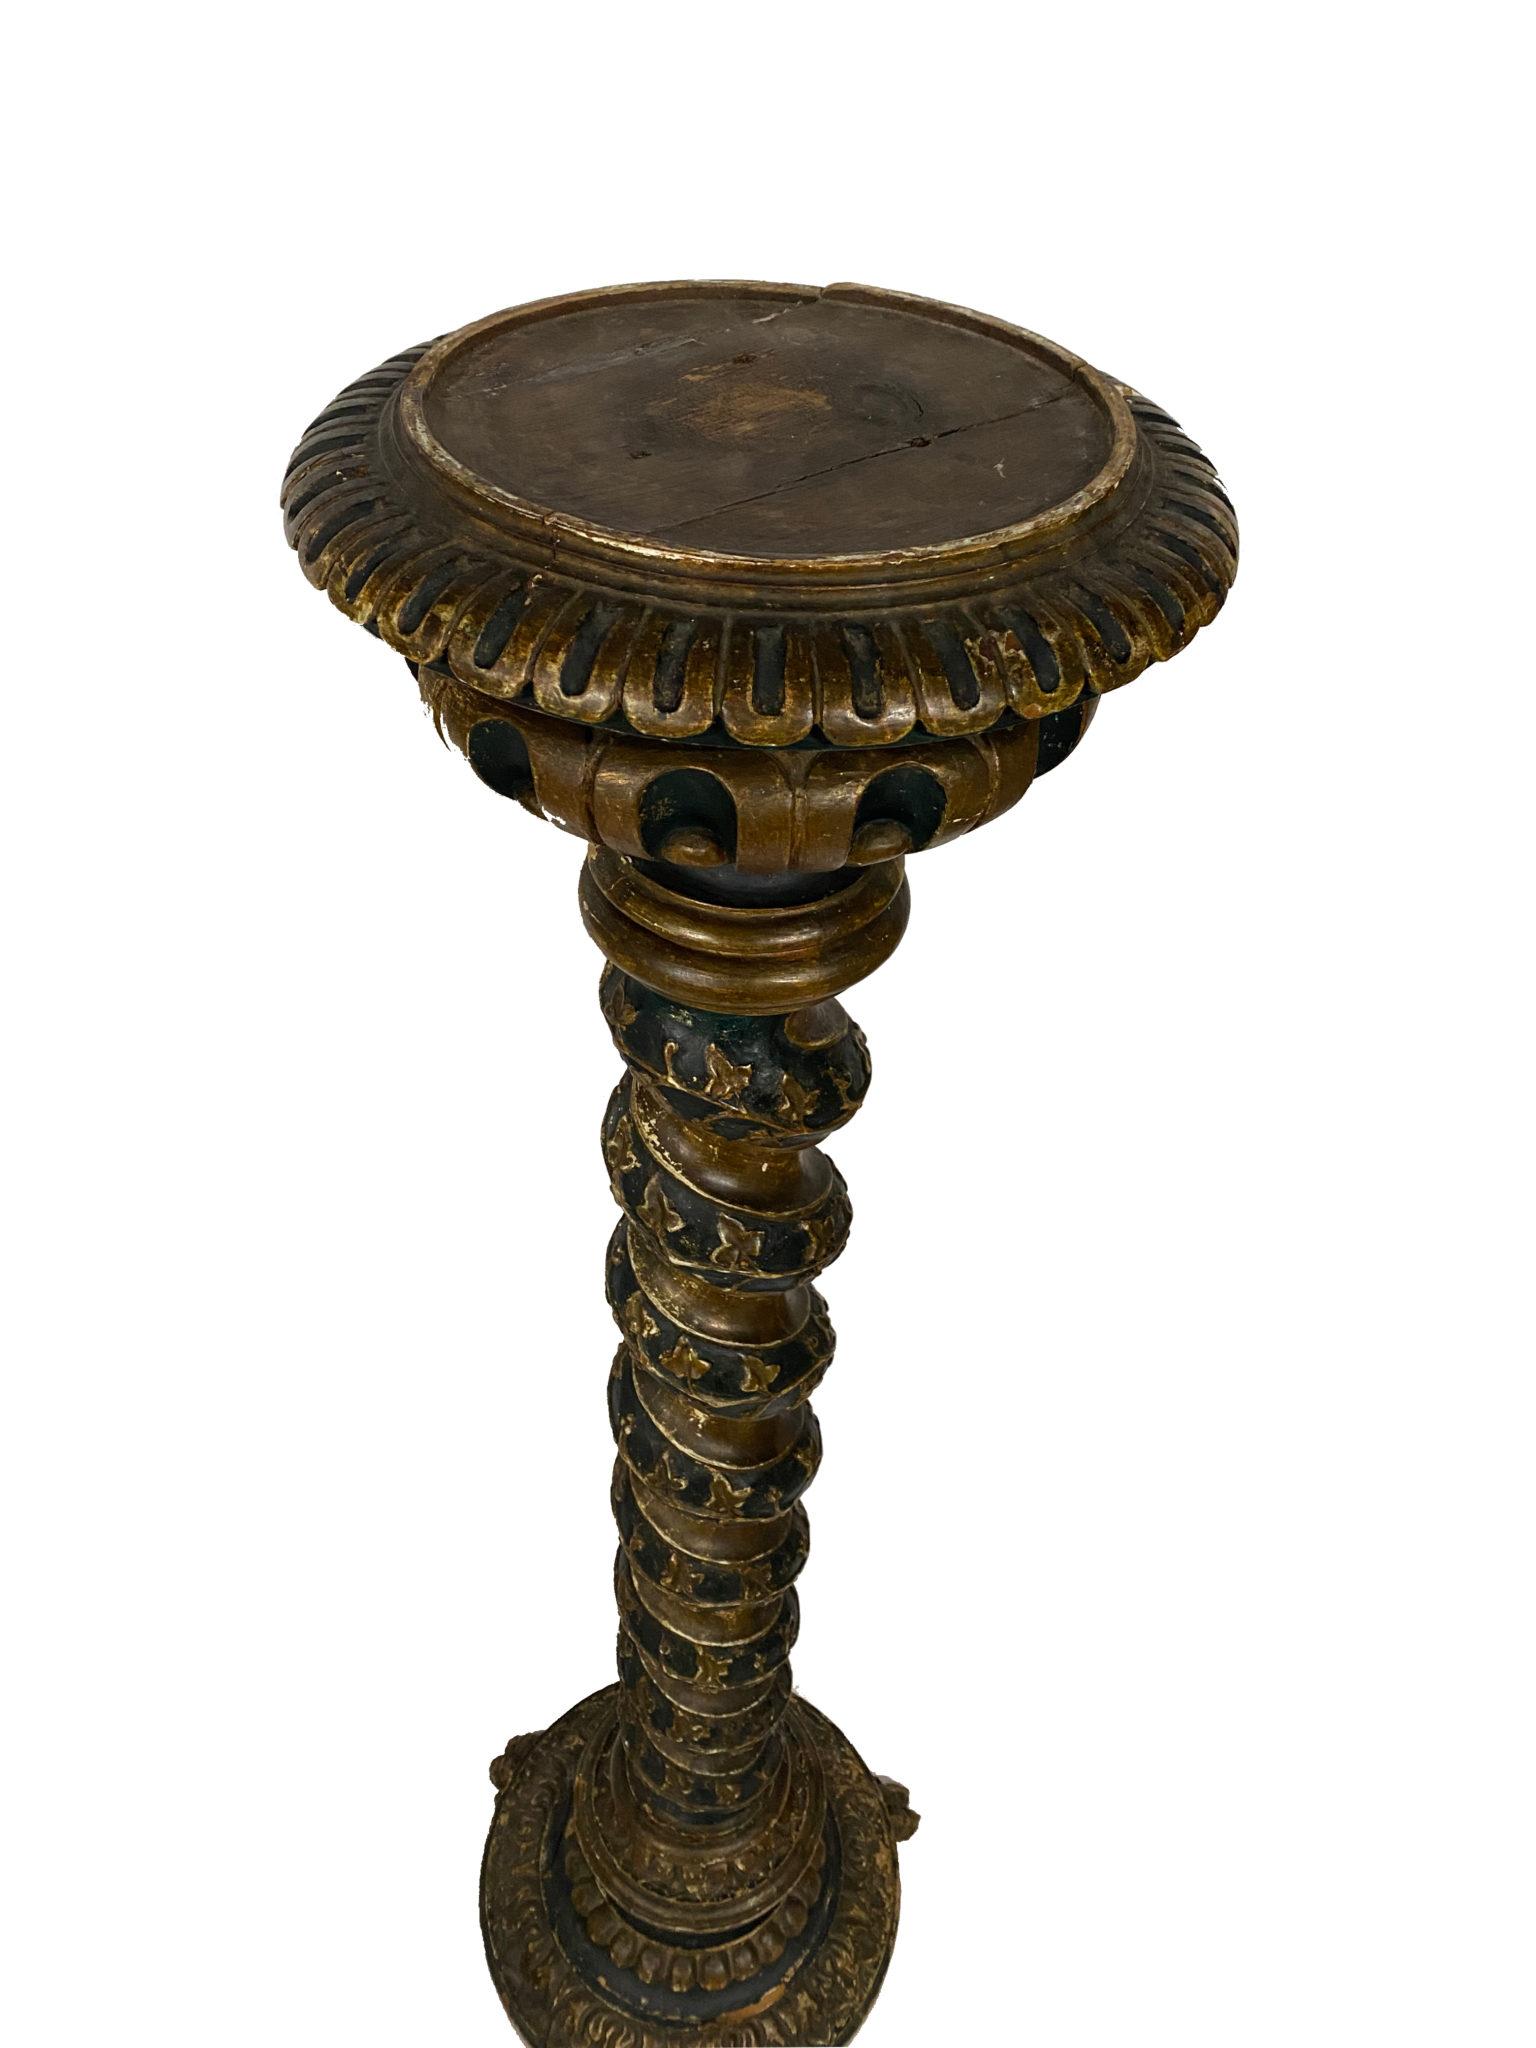 Pair of 18th C. Impressive Hand Carved Oak Baroque Pedestal Sculpture Stands In Good Condition For Sale In Sag Harbor, NY